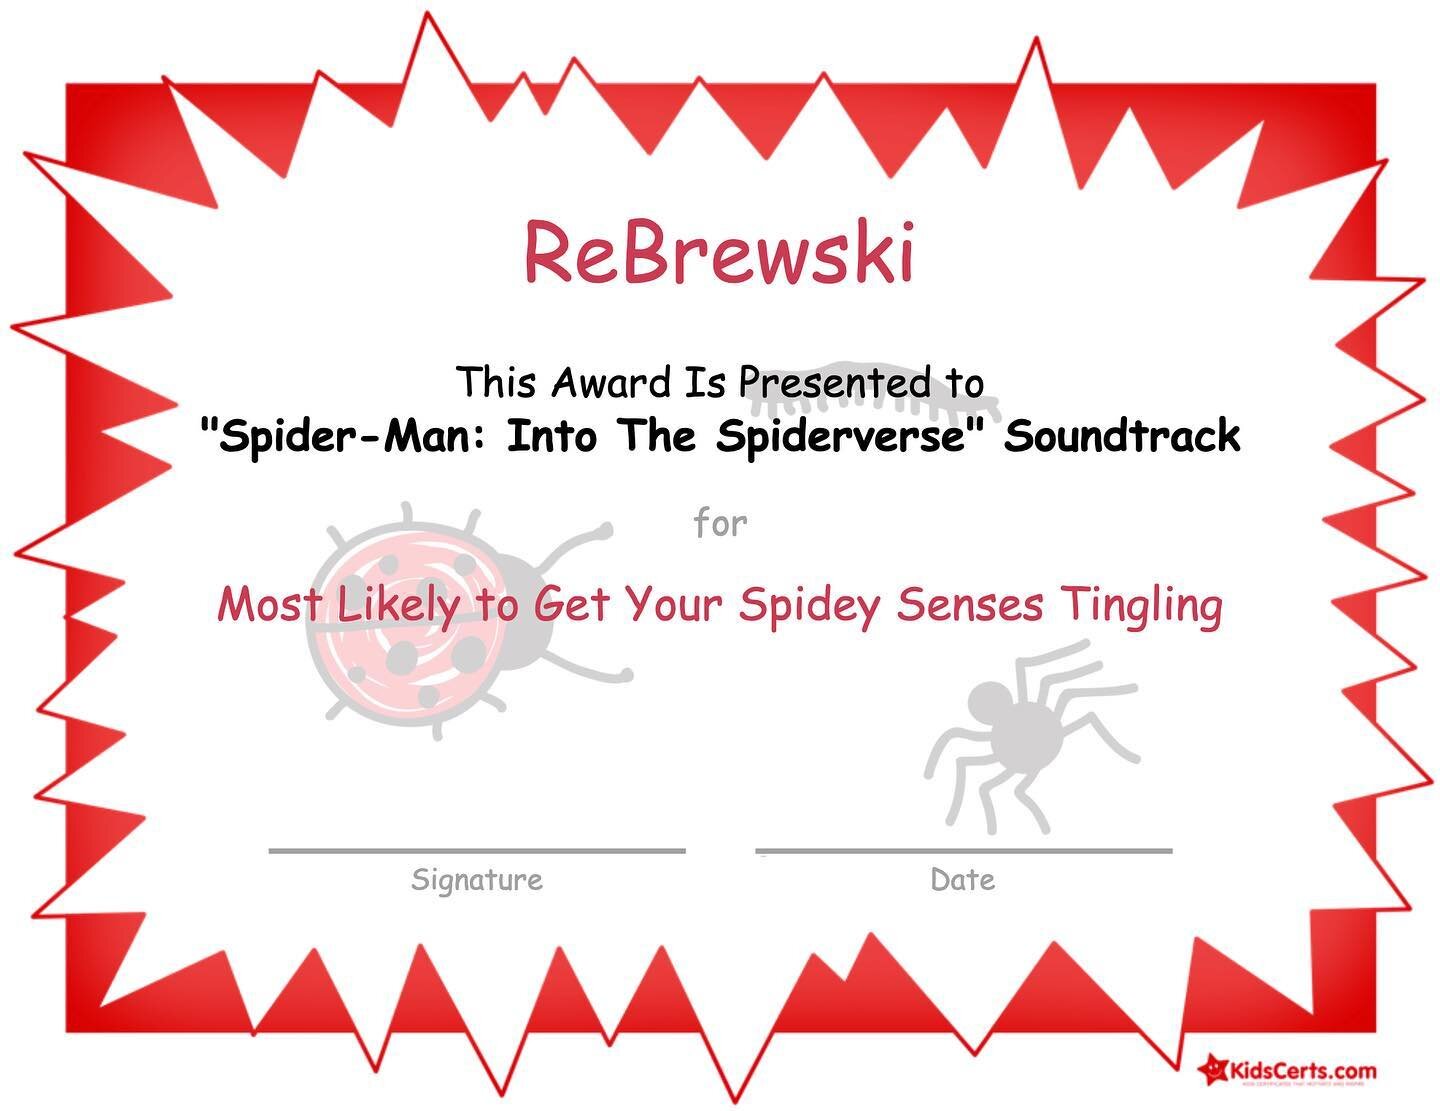 Yeah, so, Oscar nominees are out and that&rsquo;s exciting, but what&rsquo;s MORE exciting is last episode&rsquo;s ReBrewski! Congratulations to the artists behind the soundtrack for &ldquo;Spider-Man: Into The Spiderverse&rdquo; for winning the ReBr